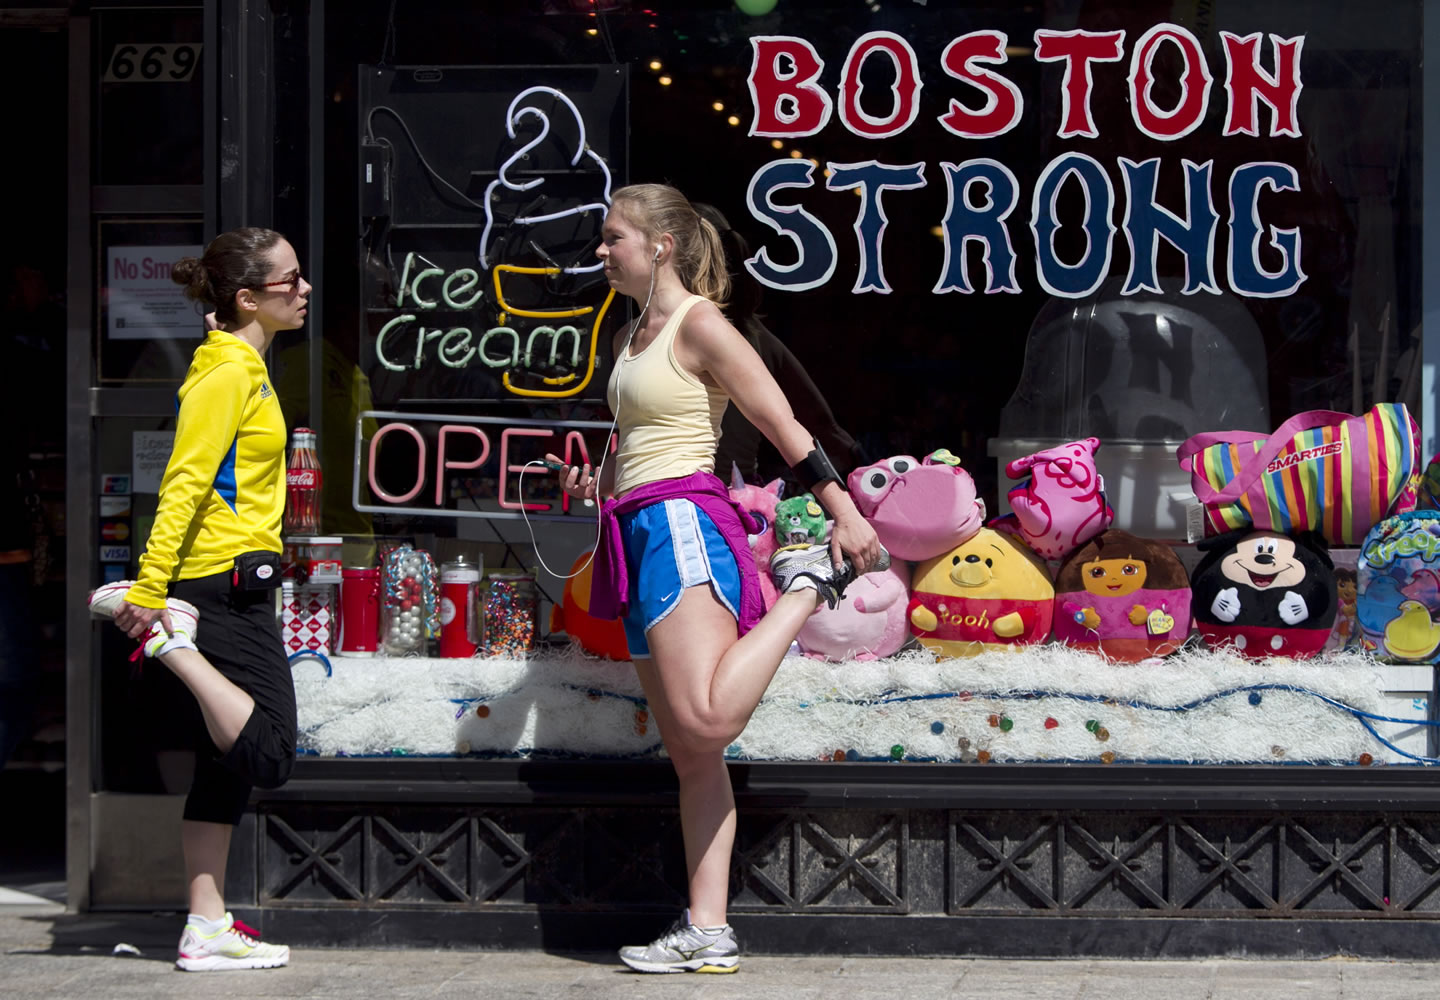 Runners Linda DePoto, left, of Brighton, Mass., and Lauren Cain, of Brookline, Mass., stretch Saturday after crossing the finish line of the Boston Marathon in Boston, Mass.